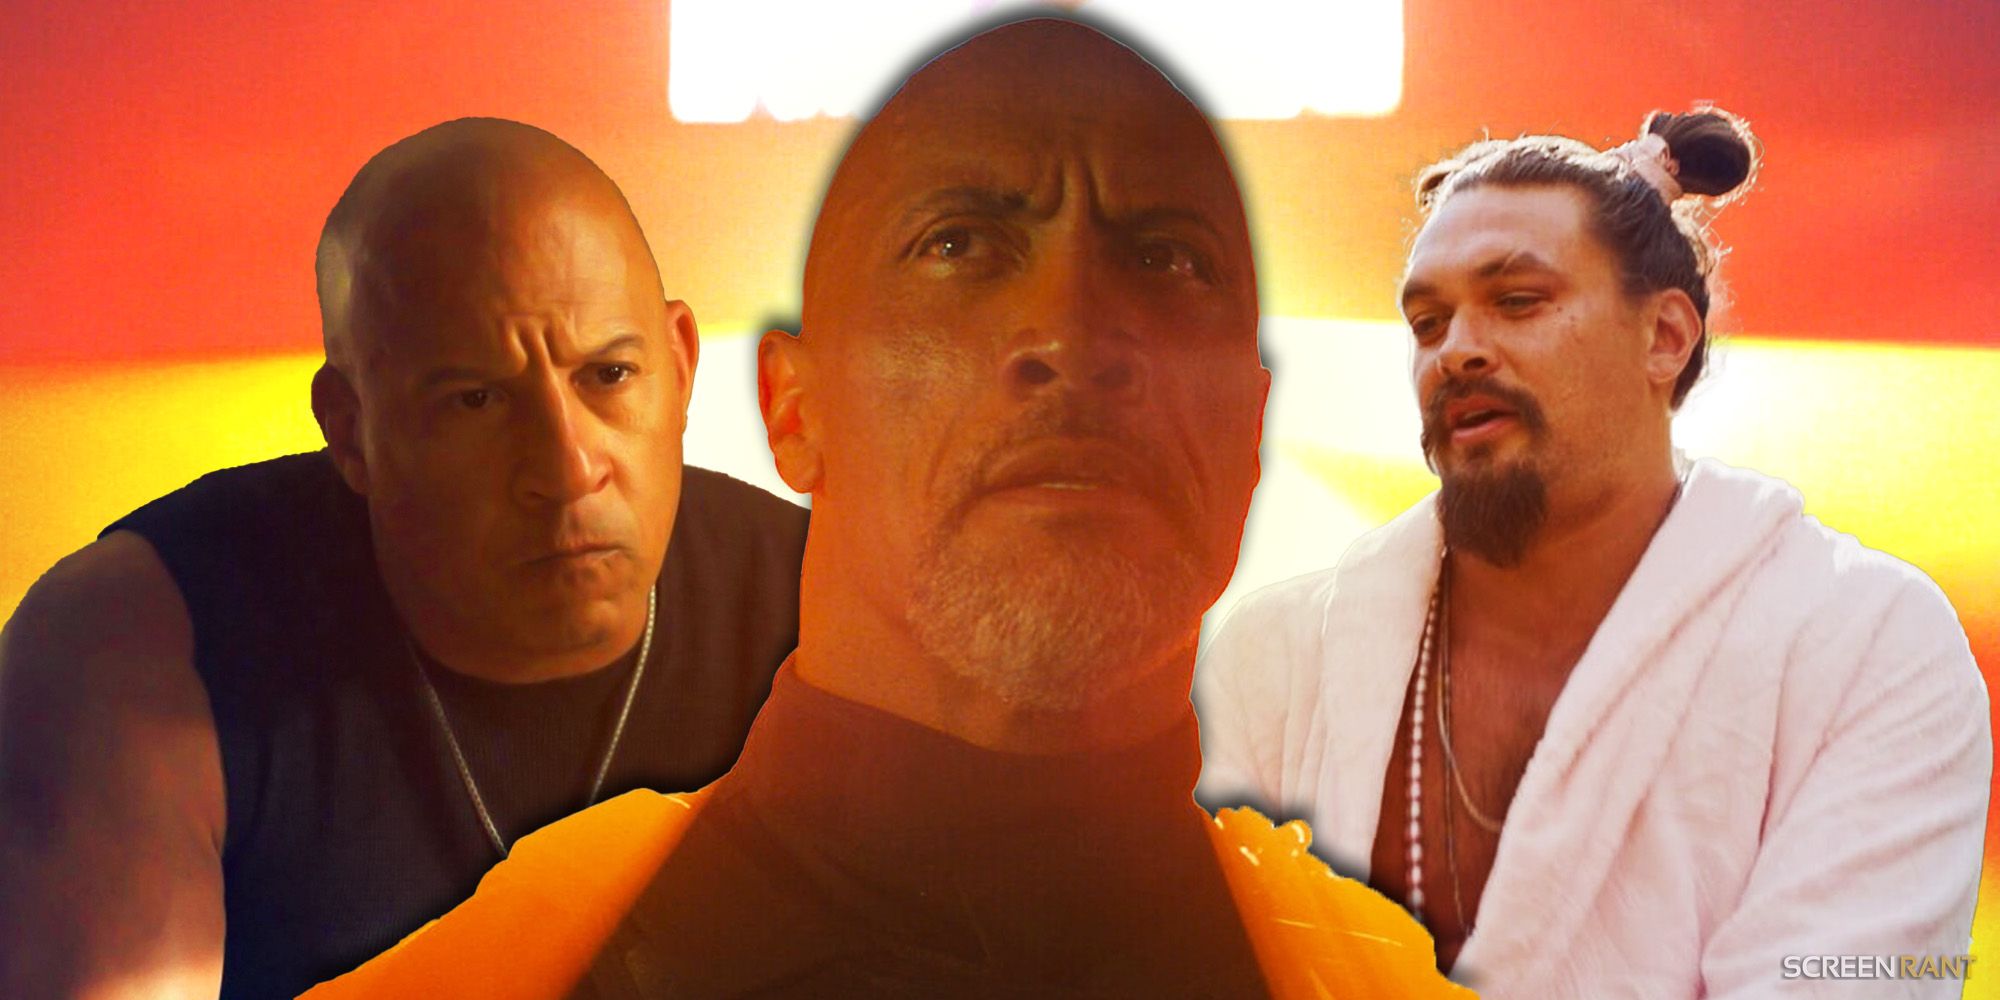 The Rock as Hobbs, Vin Diesel as Dom, and Jason Momoa as Dante in Fast X